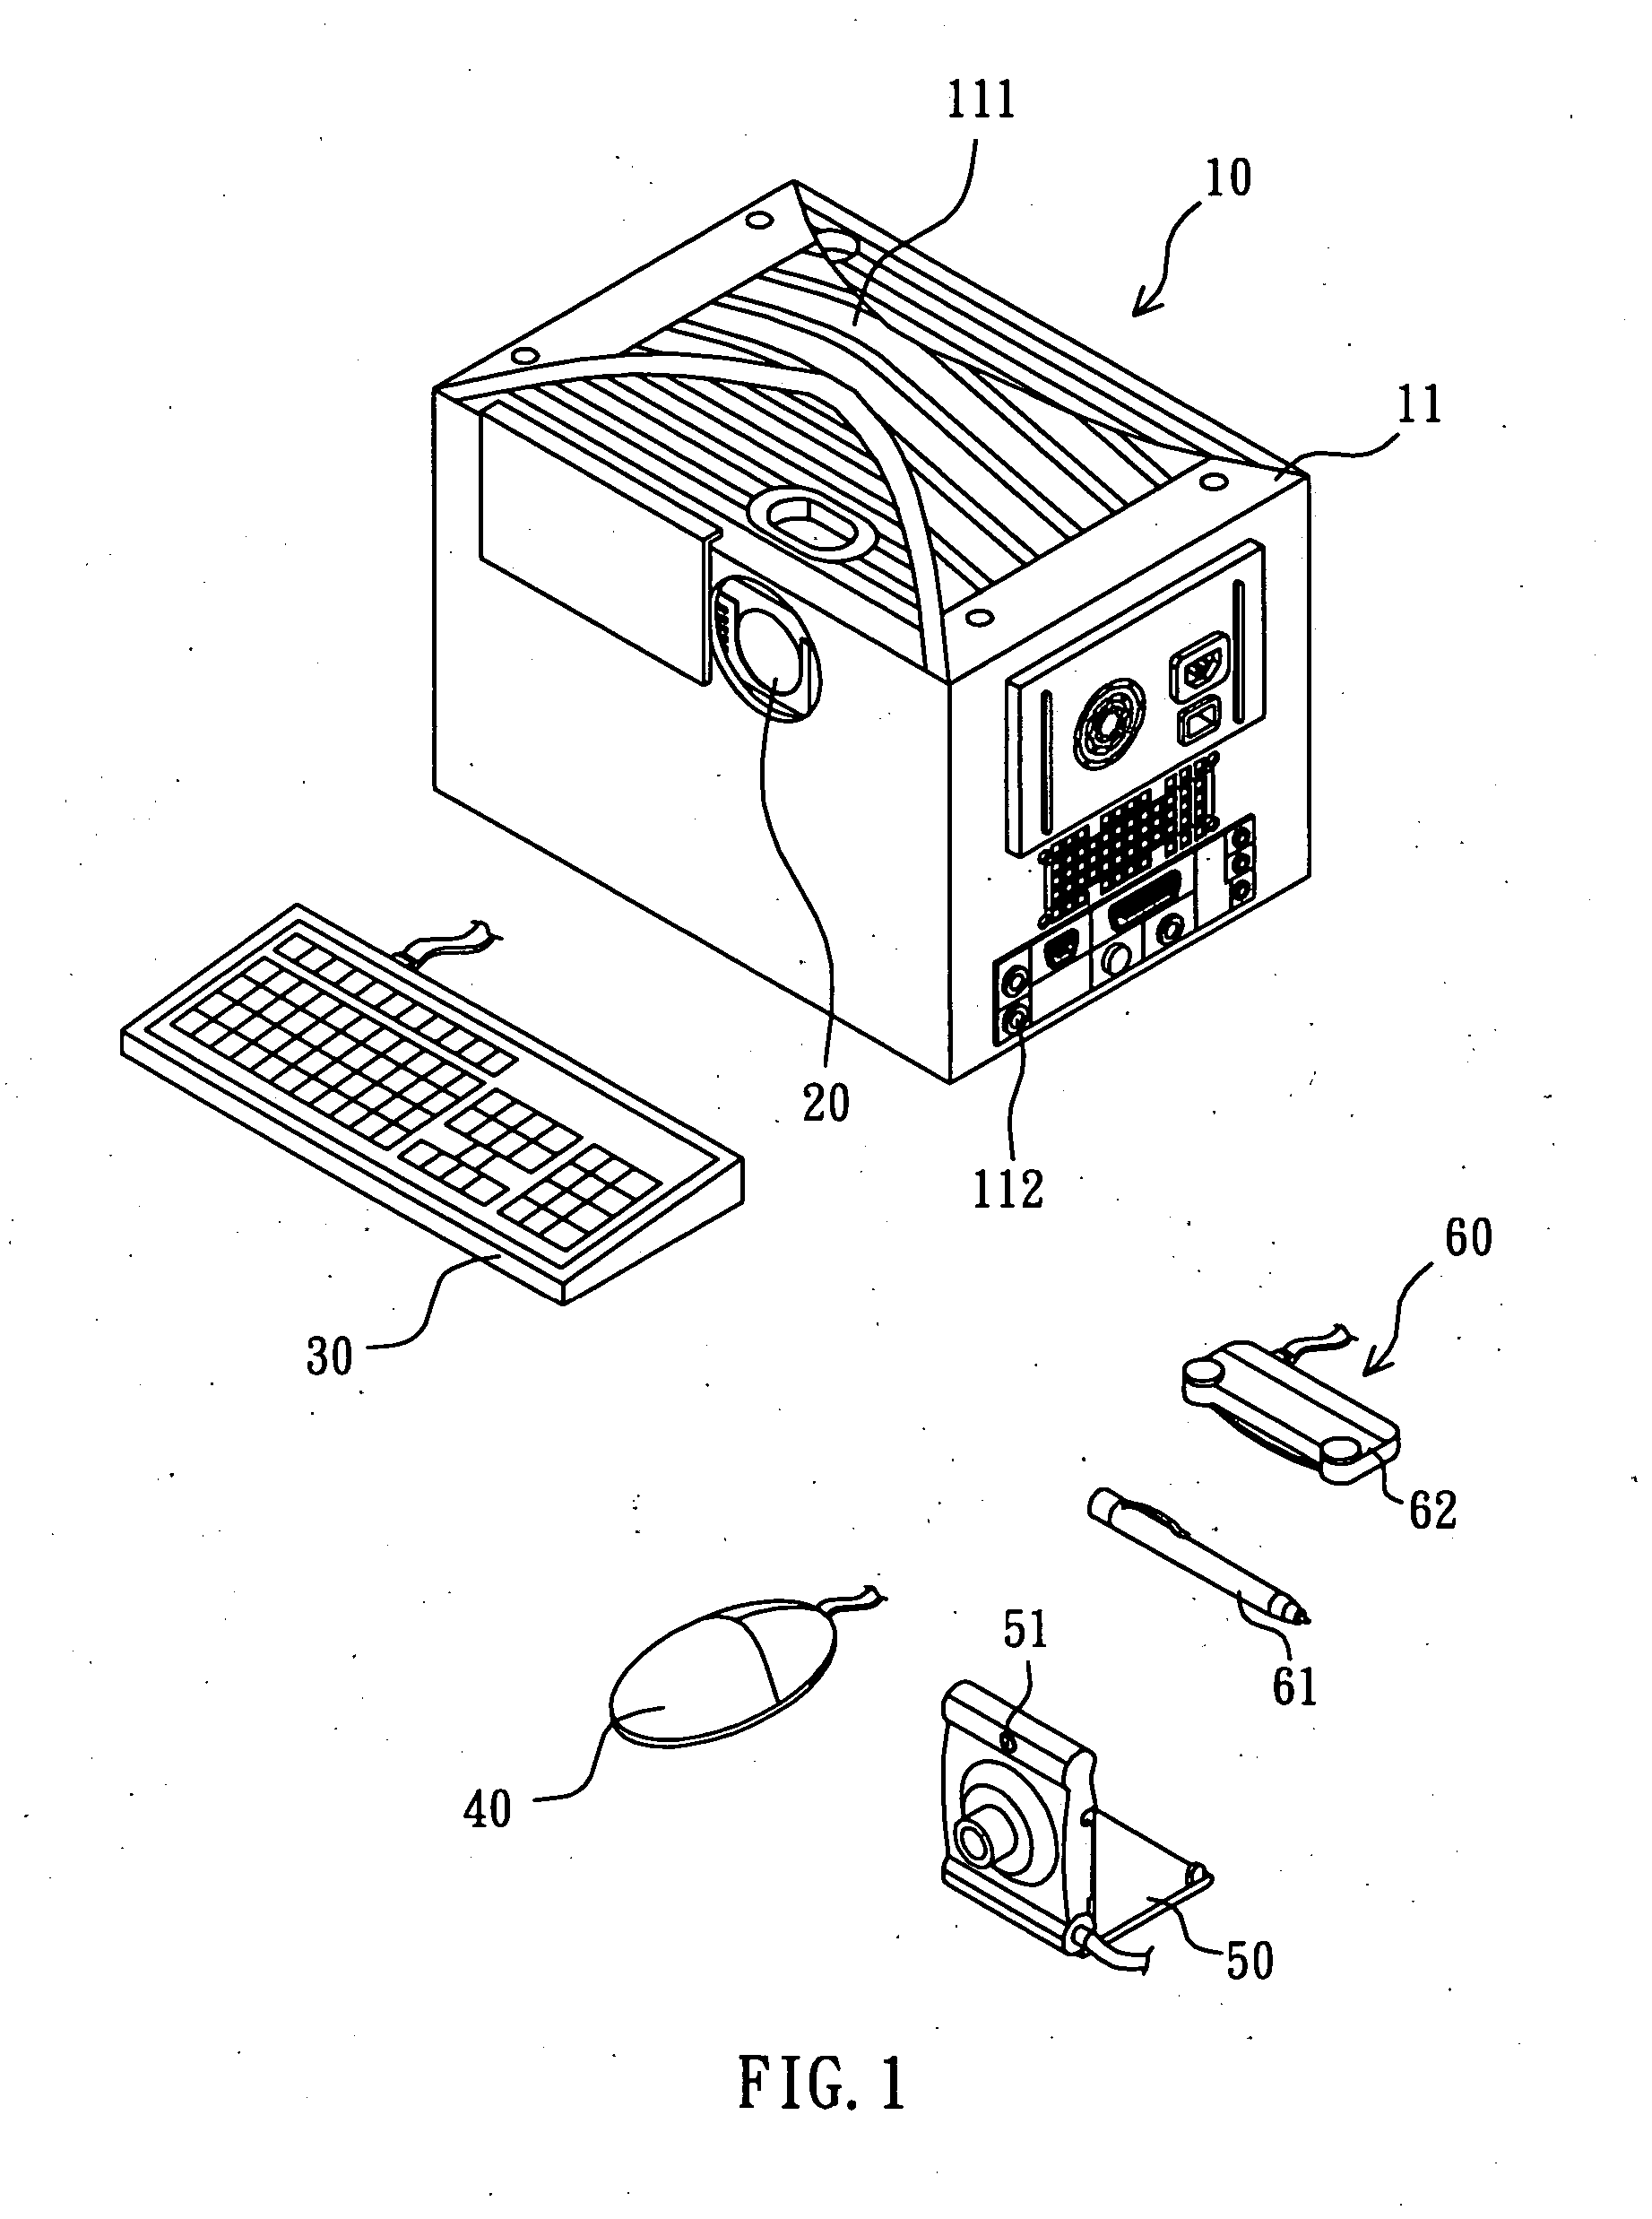 Mobile teaching aid with audiovisual amusement device